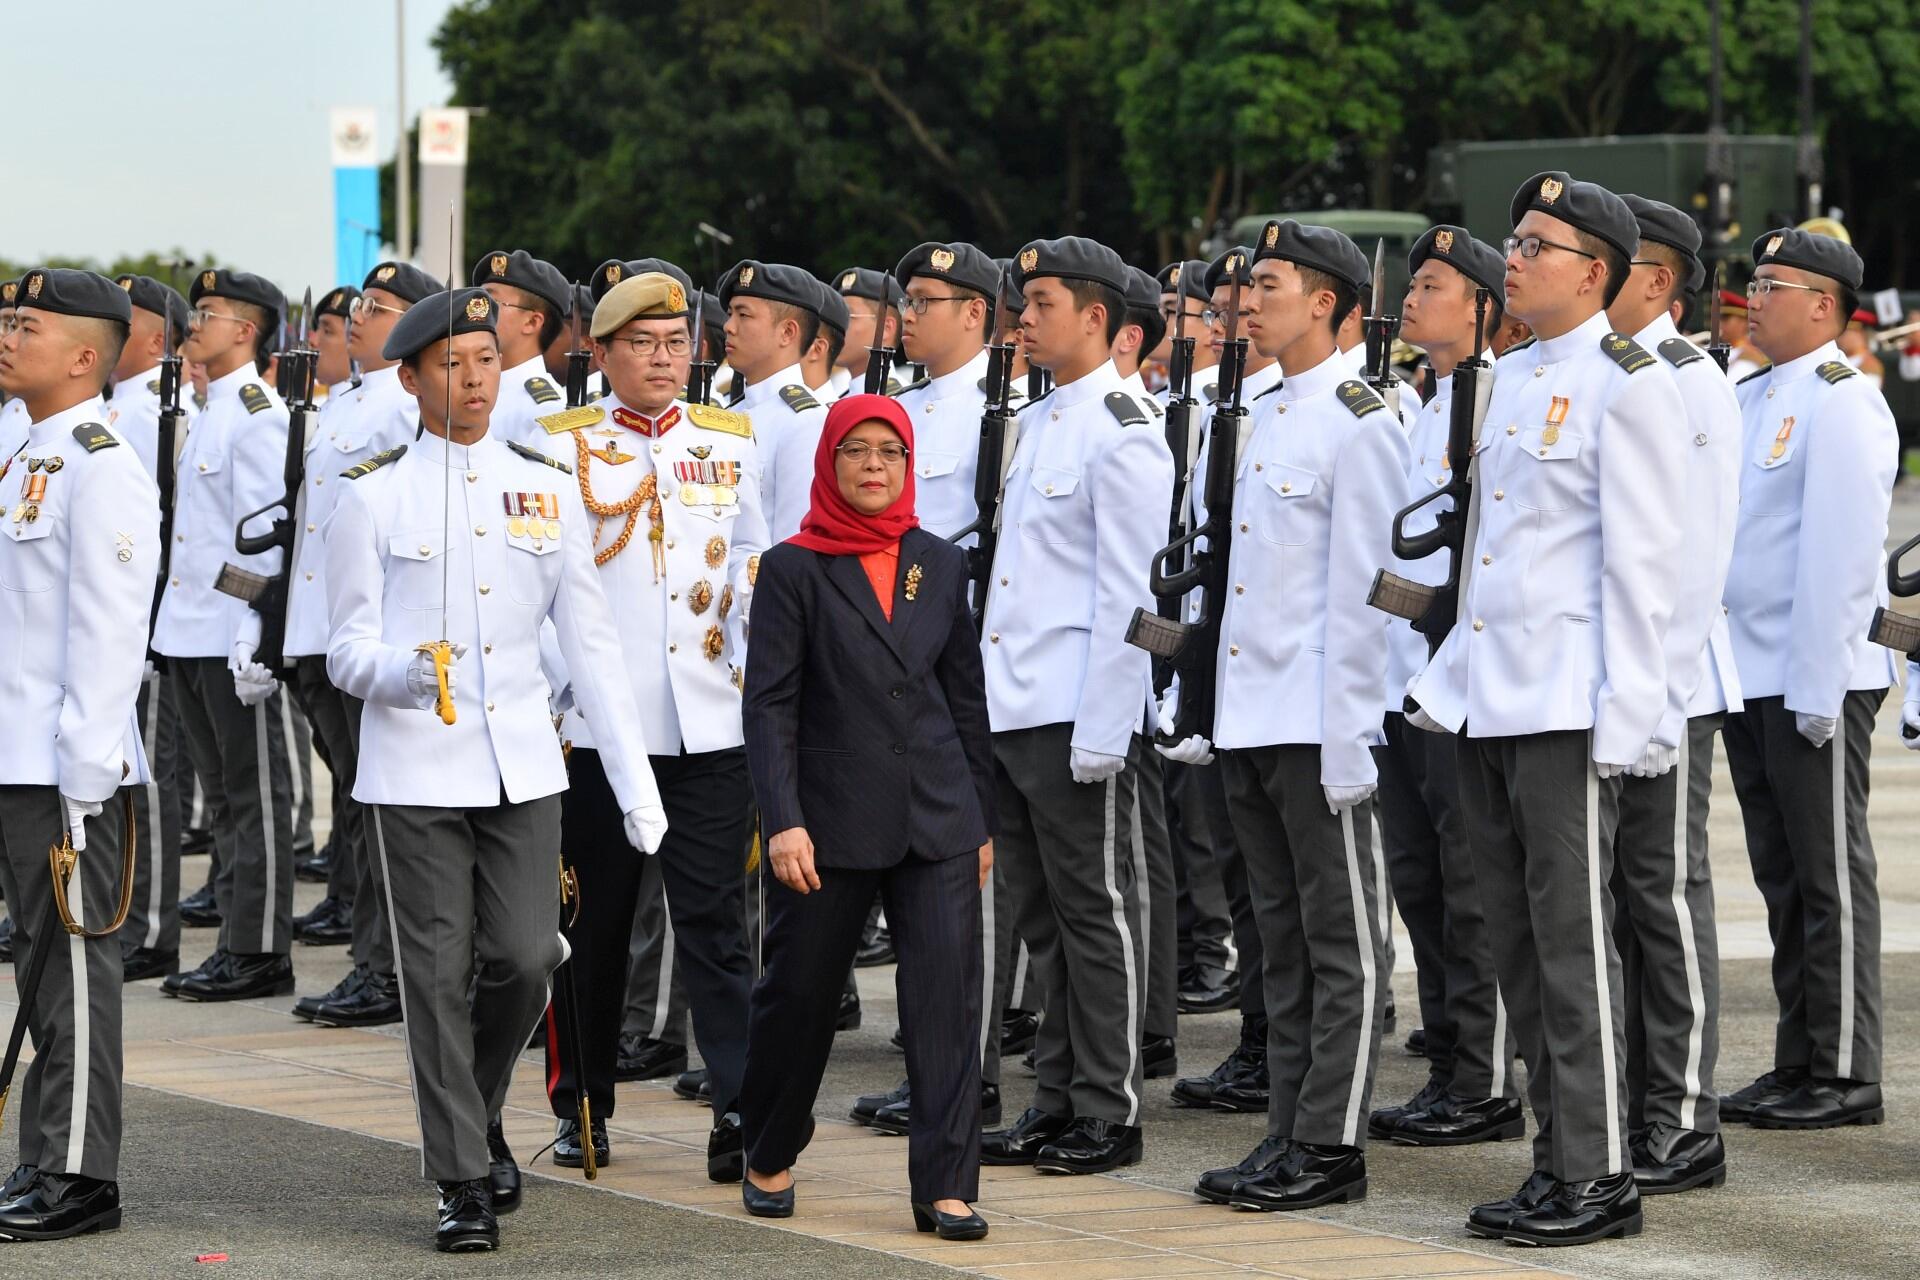 President Halimah Yacob inspecting the Digital and Intelligence Service (DIS) contingents at the DIS Inauguration Parade held at SATI Military Institute (SAFTI MI) this evening.